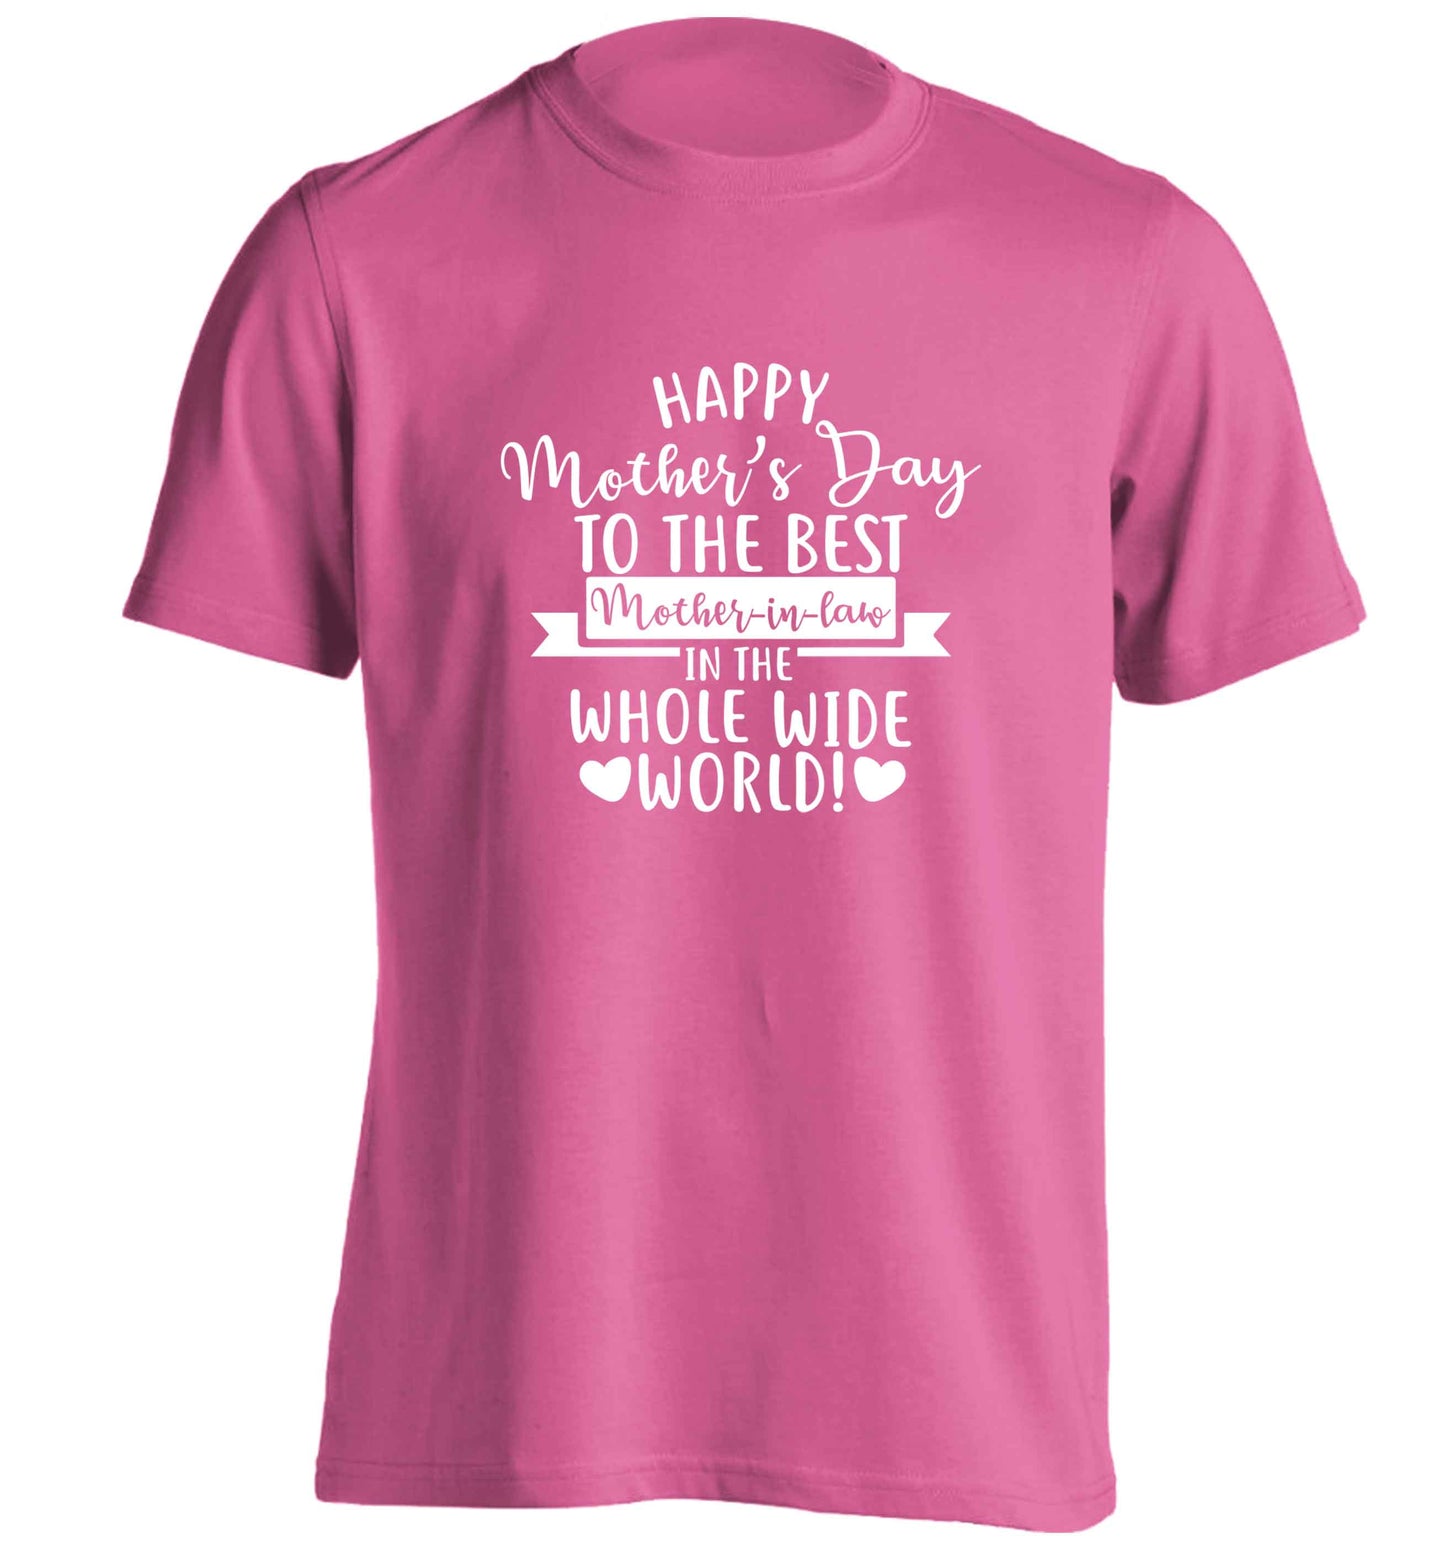 Happy mother's day to the best mother-in law in the world adults unisex pink Tshirt 2XL